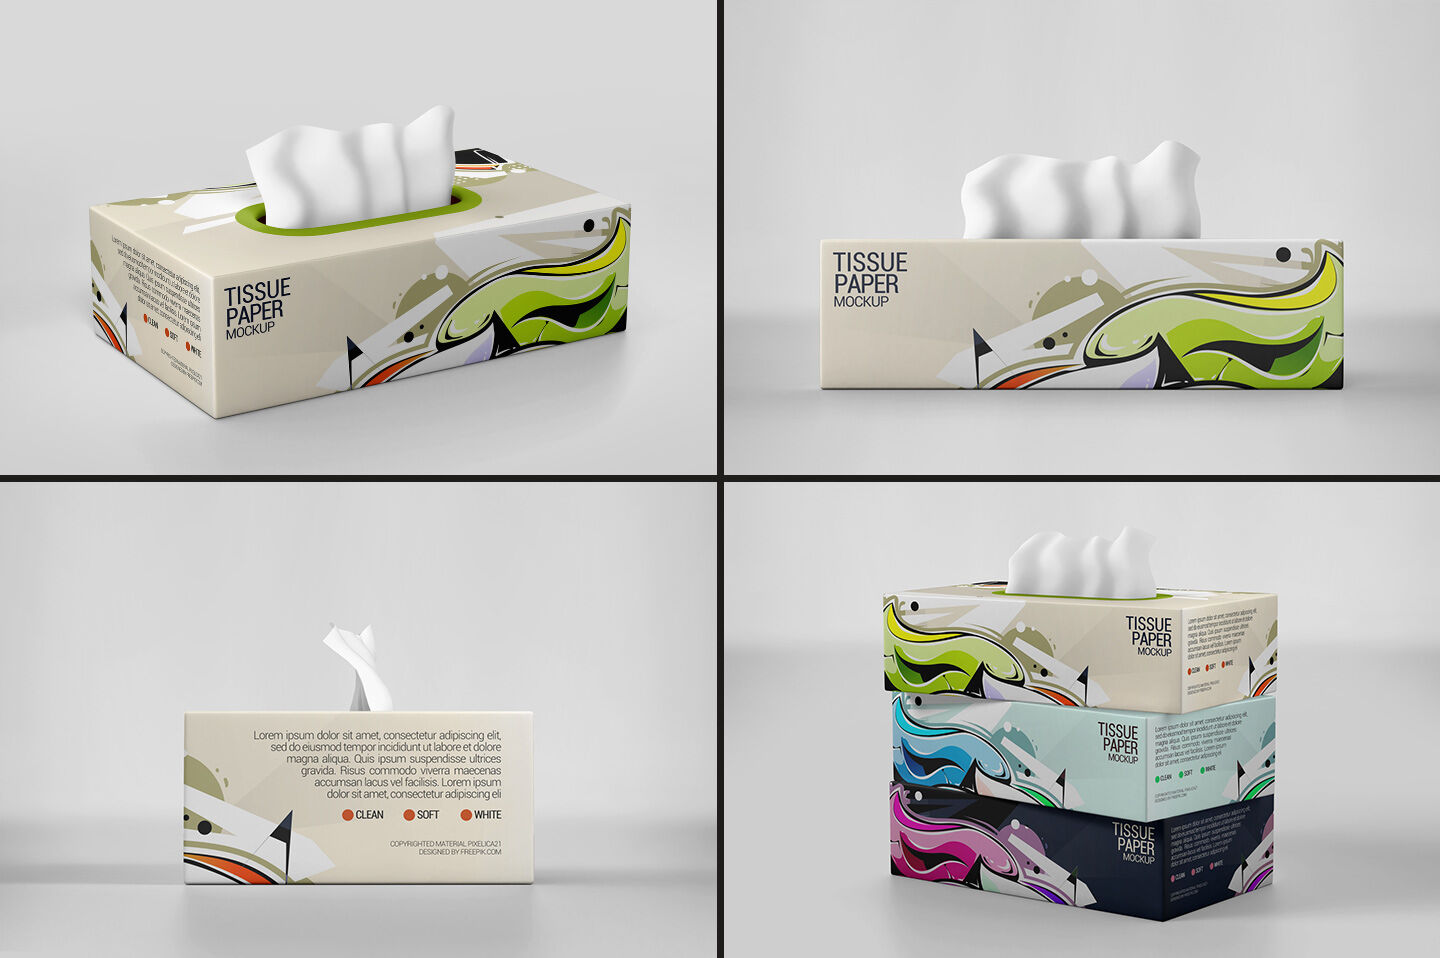 Tissue Paper Box Packaging Mockup